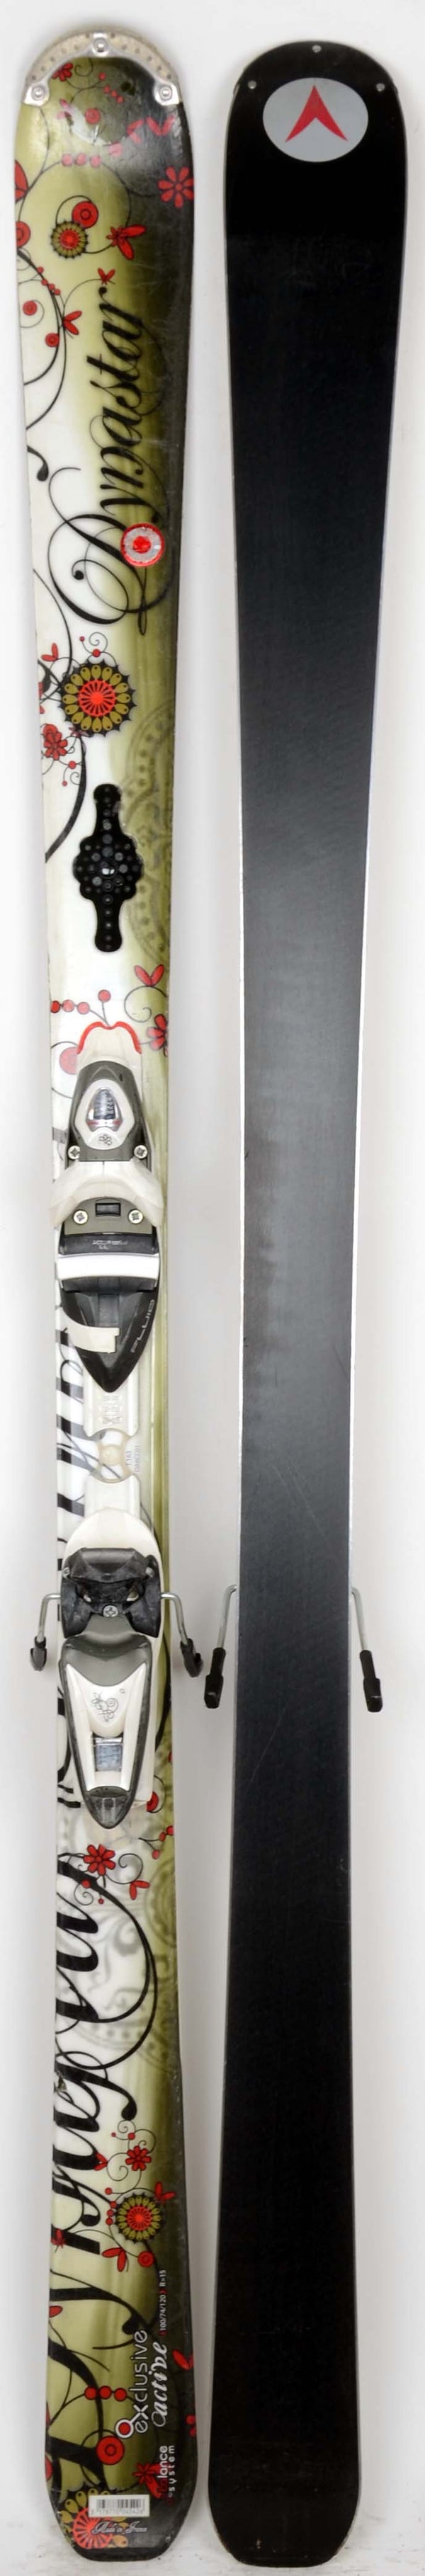 Dynastar Exclusive - Skis Femme d'occasion